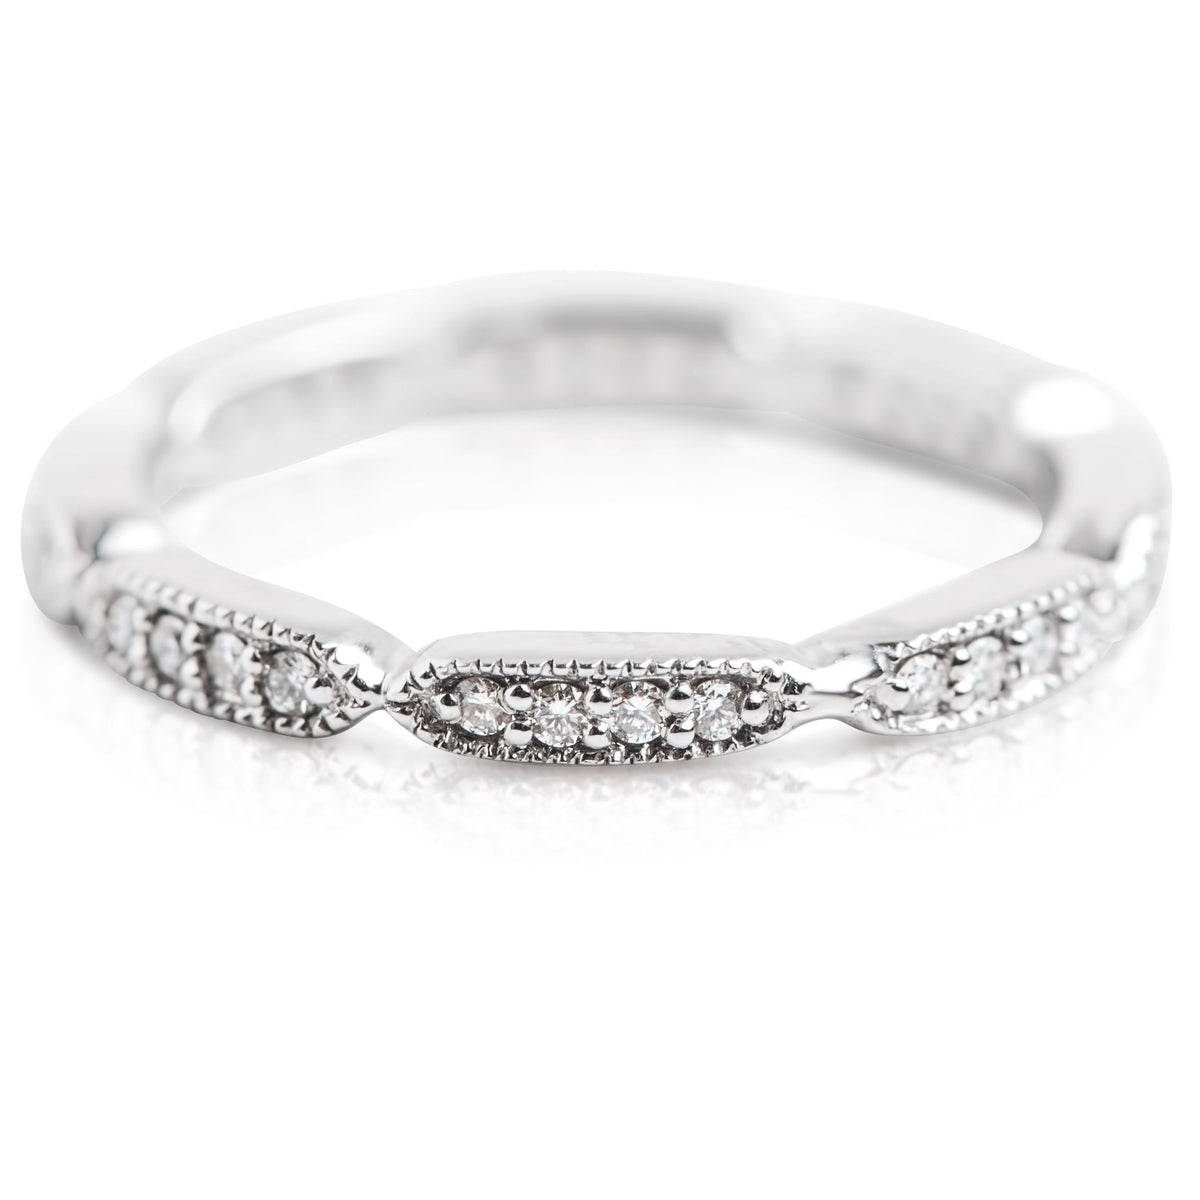 WHITE GOLD AND DIAMOND ETERNITY BAND 